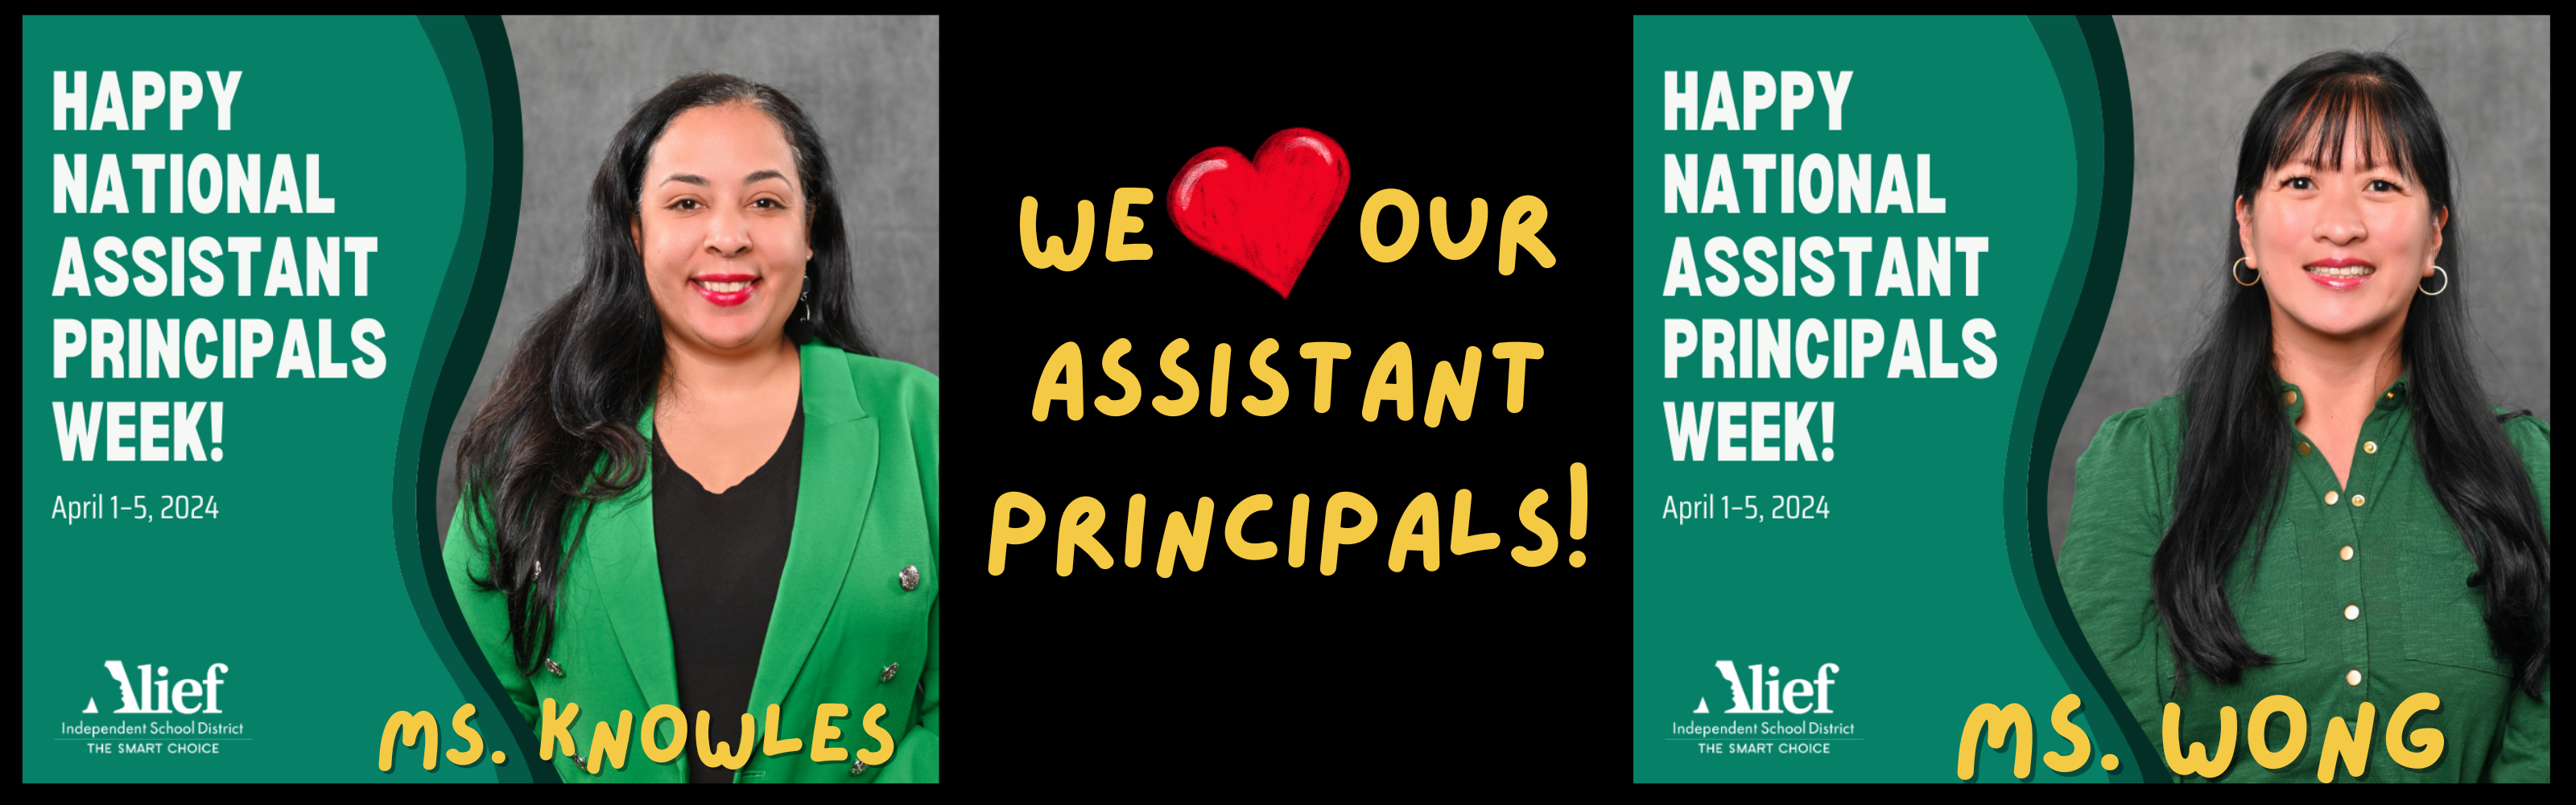 We love our assitant Principals Ms. Wong and Ms. Knowles. Picture of them. Assistant Principal Week 